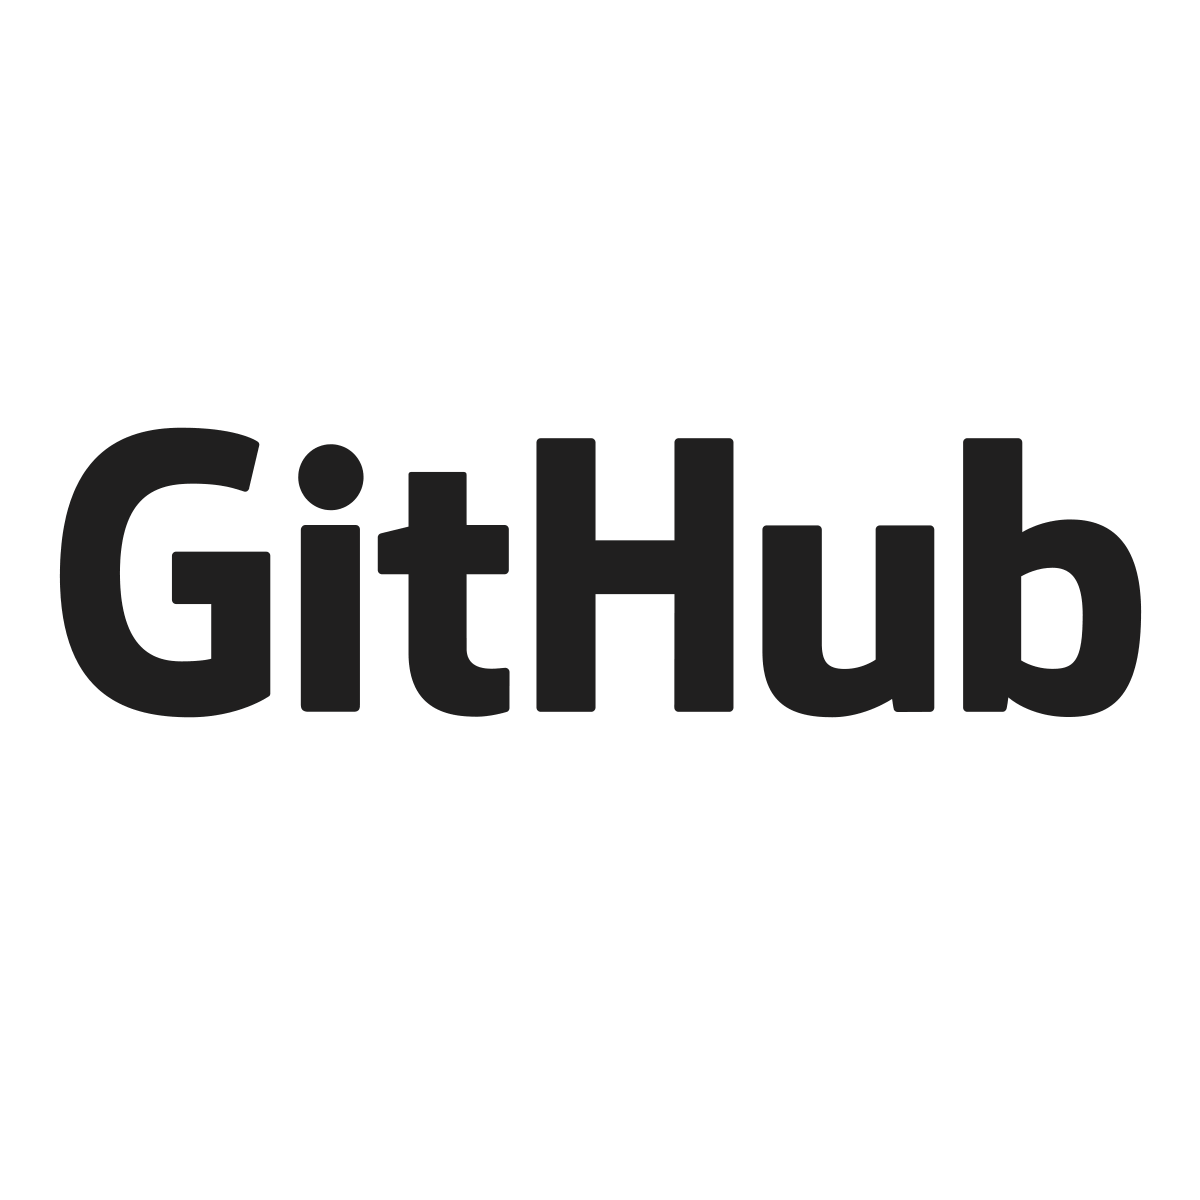 And Github Master could be th